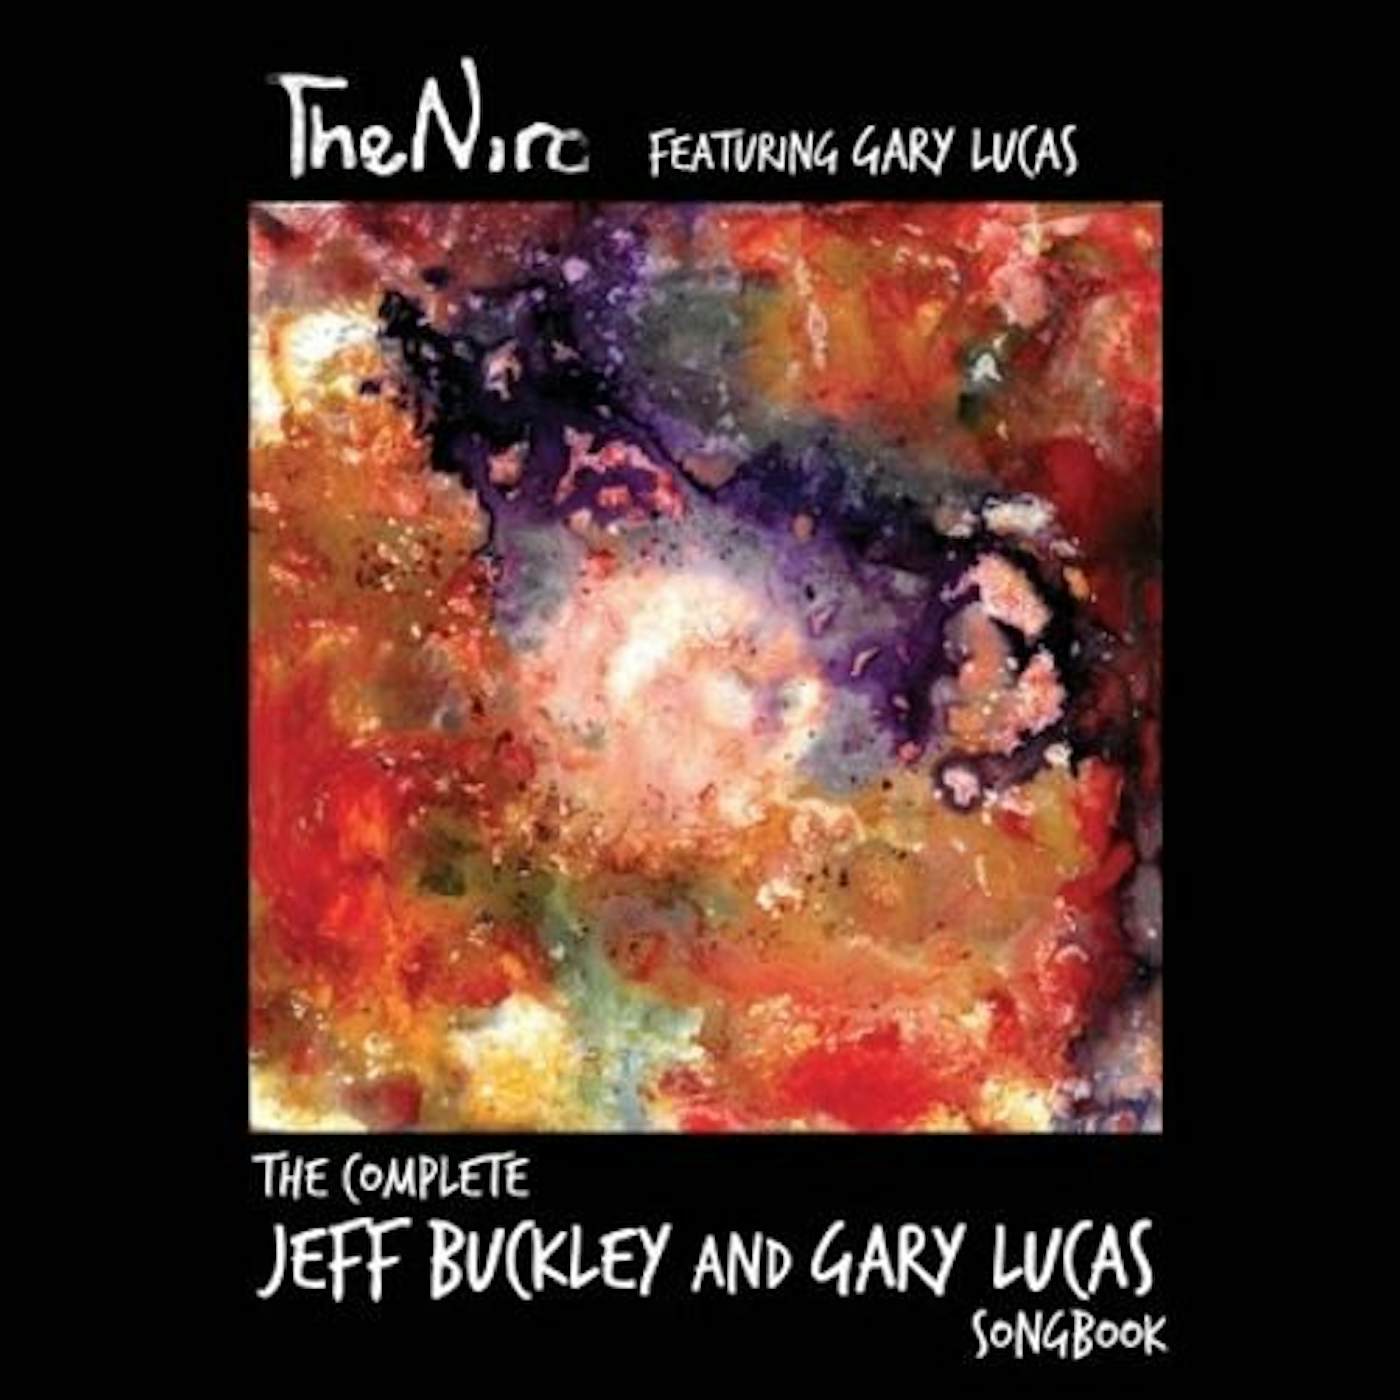 The Niro COMPLETE JEFF BUCKLEY AND GARY LUCAS SONGBOOK Vinyl Record